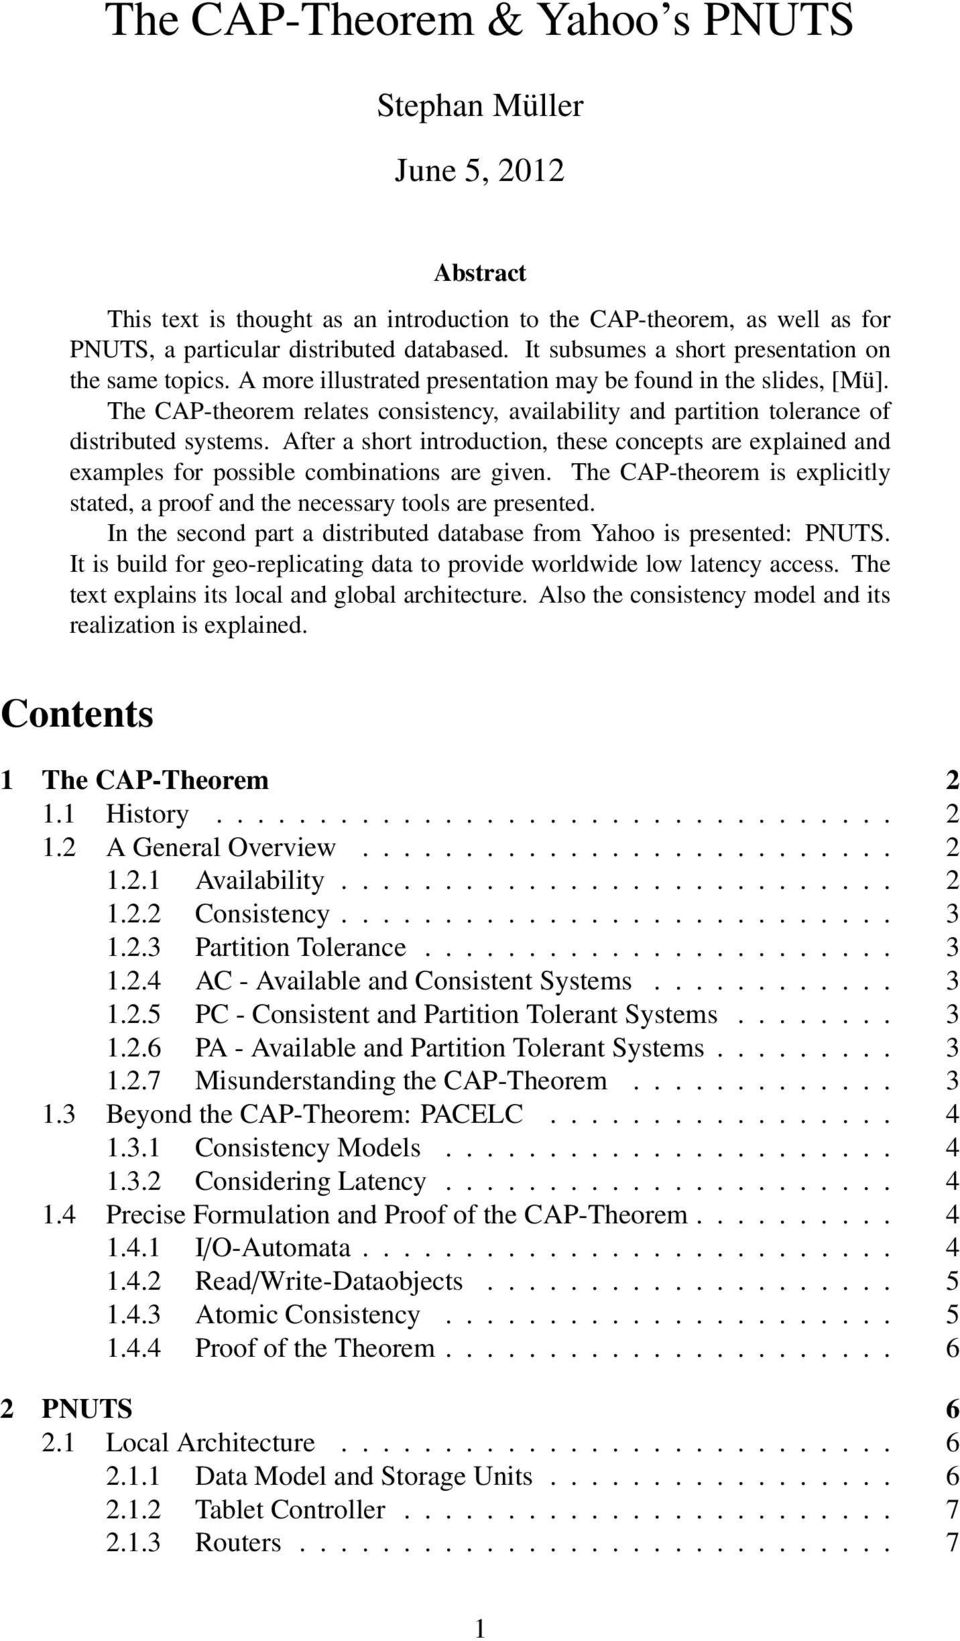 The CAP-theorem relates consistency, availability and partition tolerance of distributed systems.